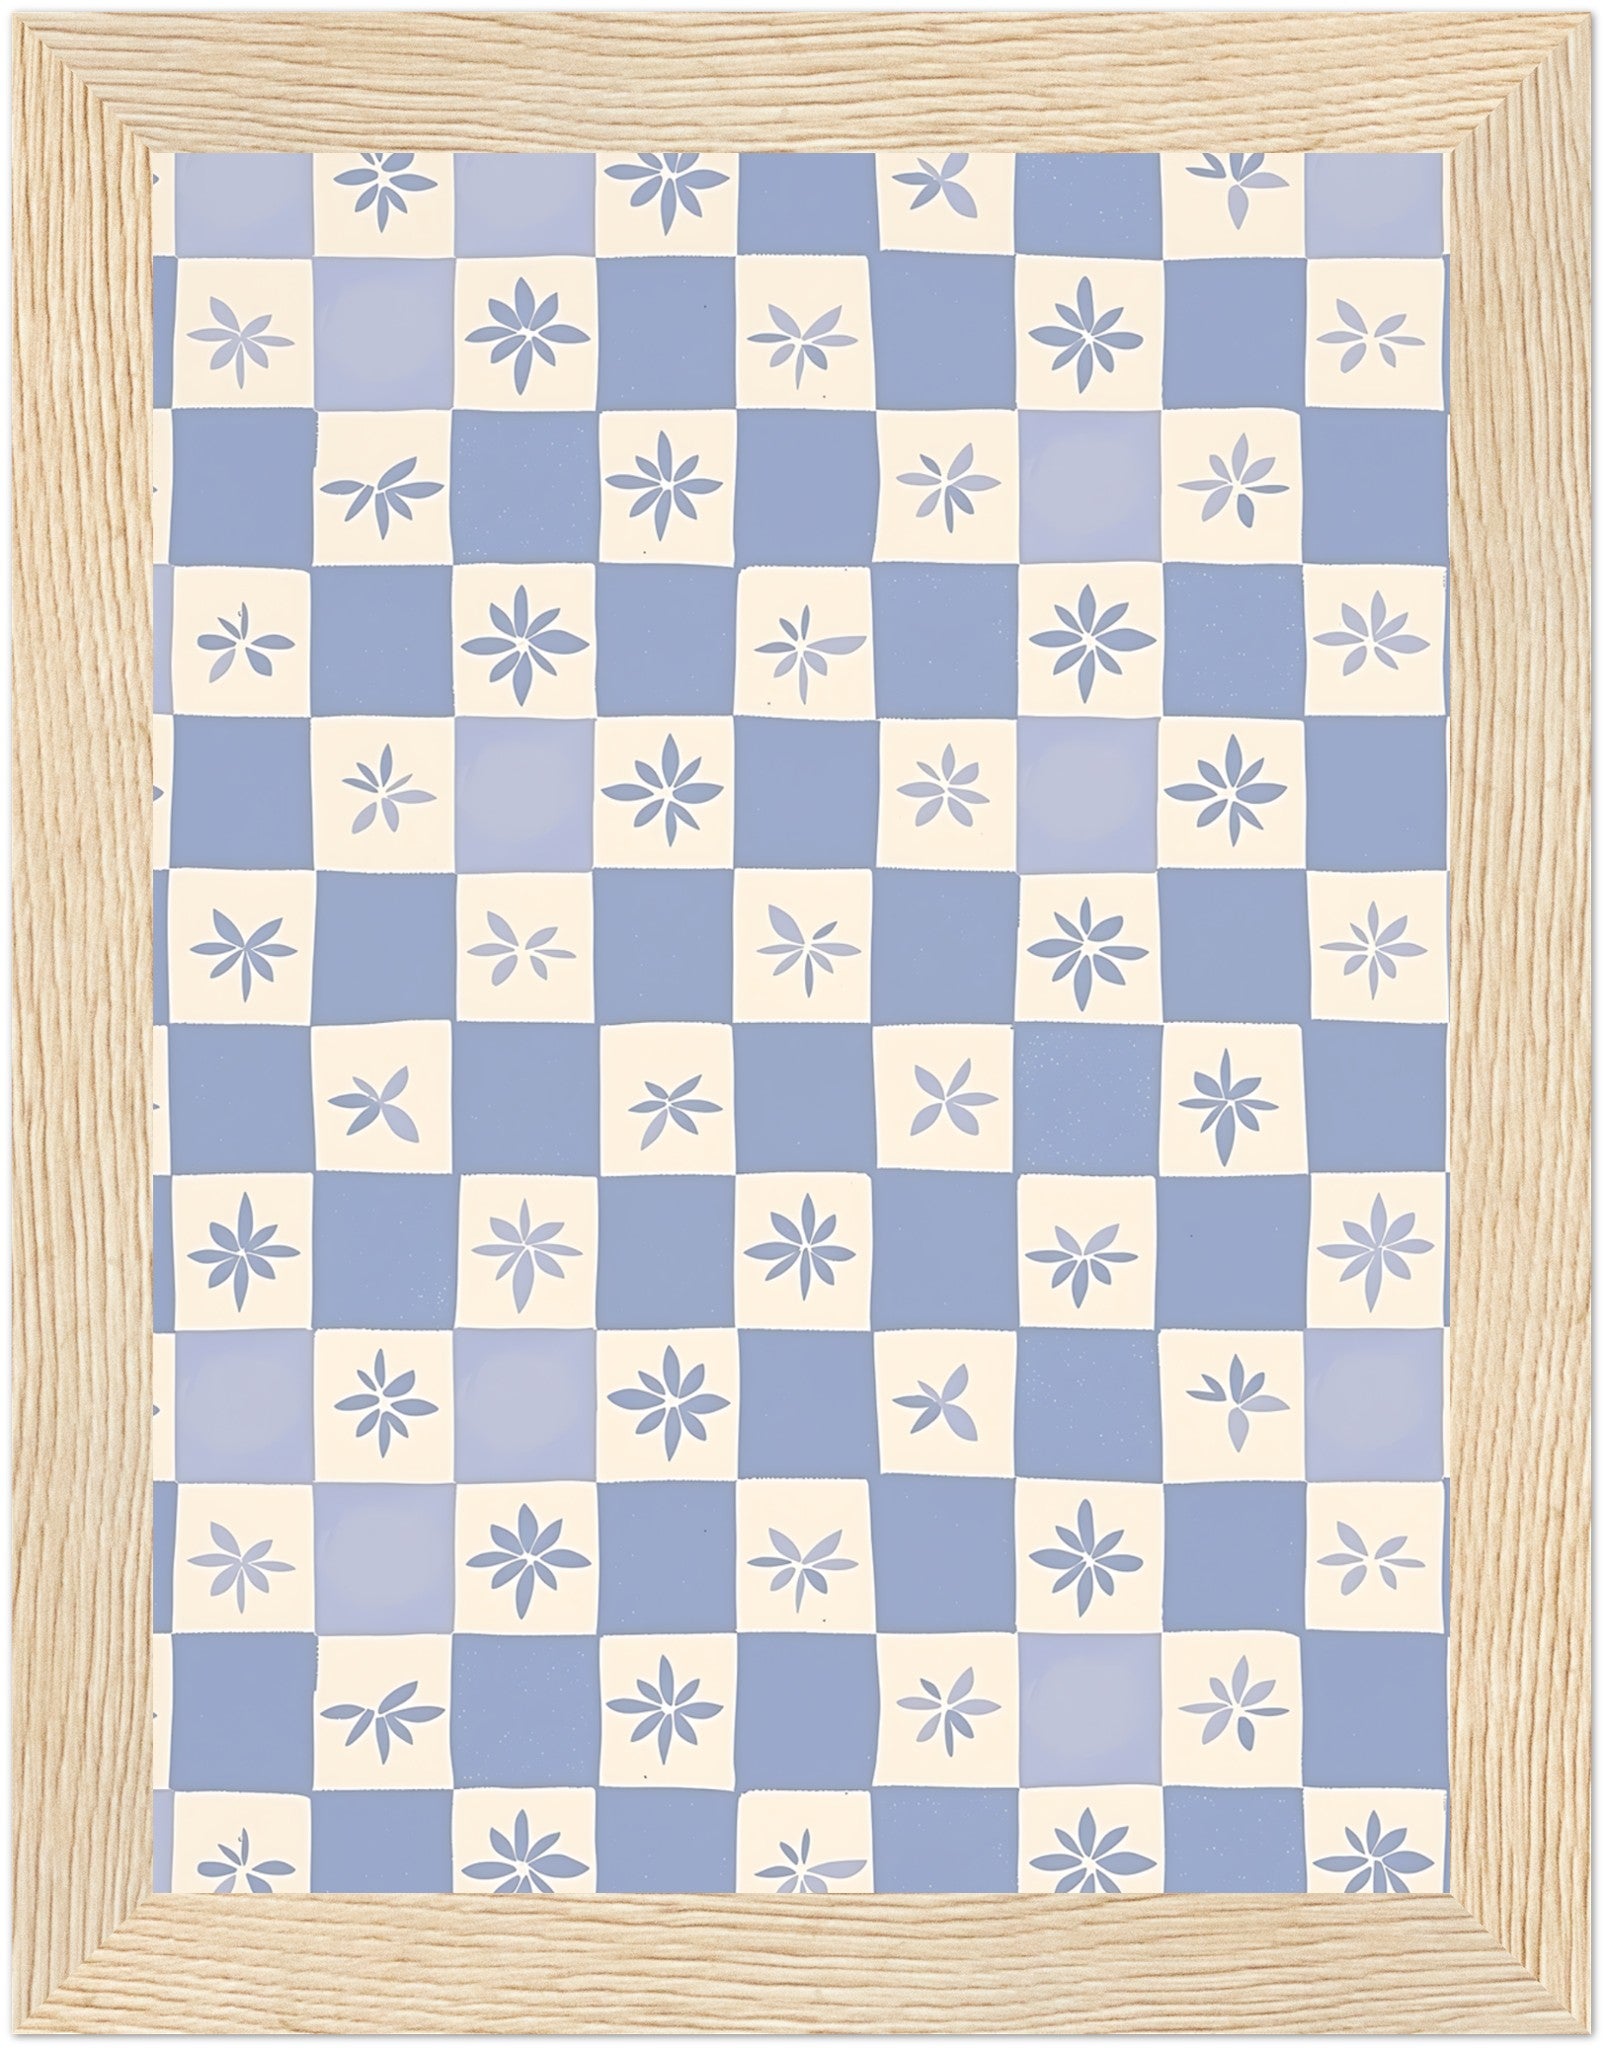 A framed checkerboard pattern with alternating blue squares and white squares, each featuring a flower design.